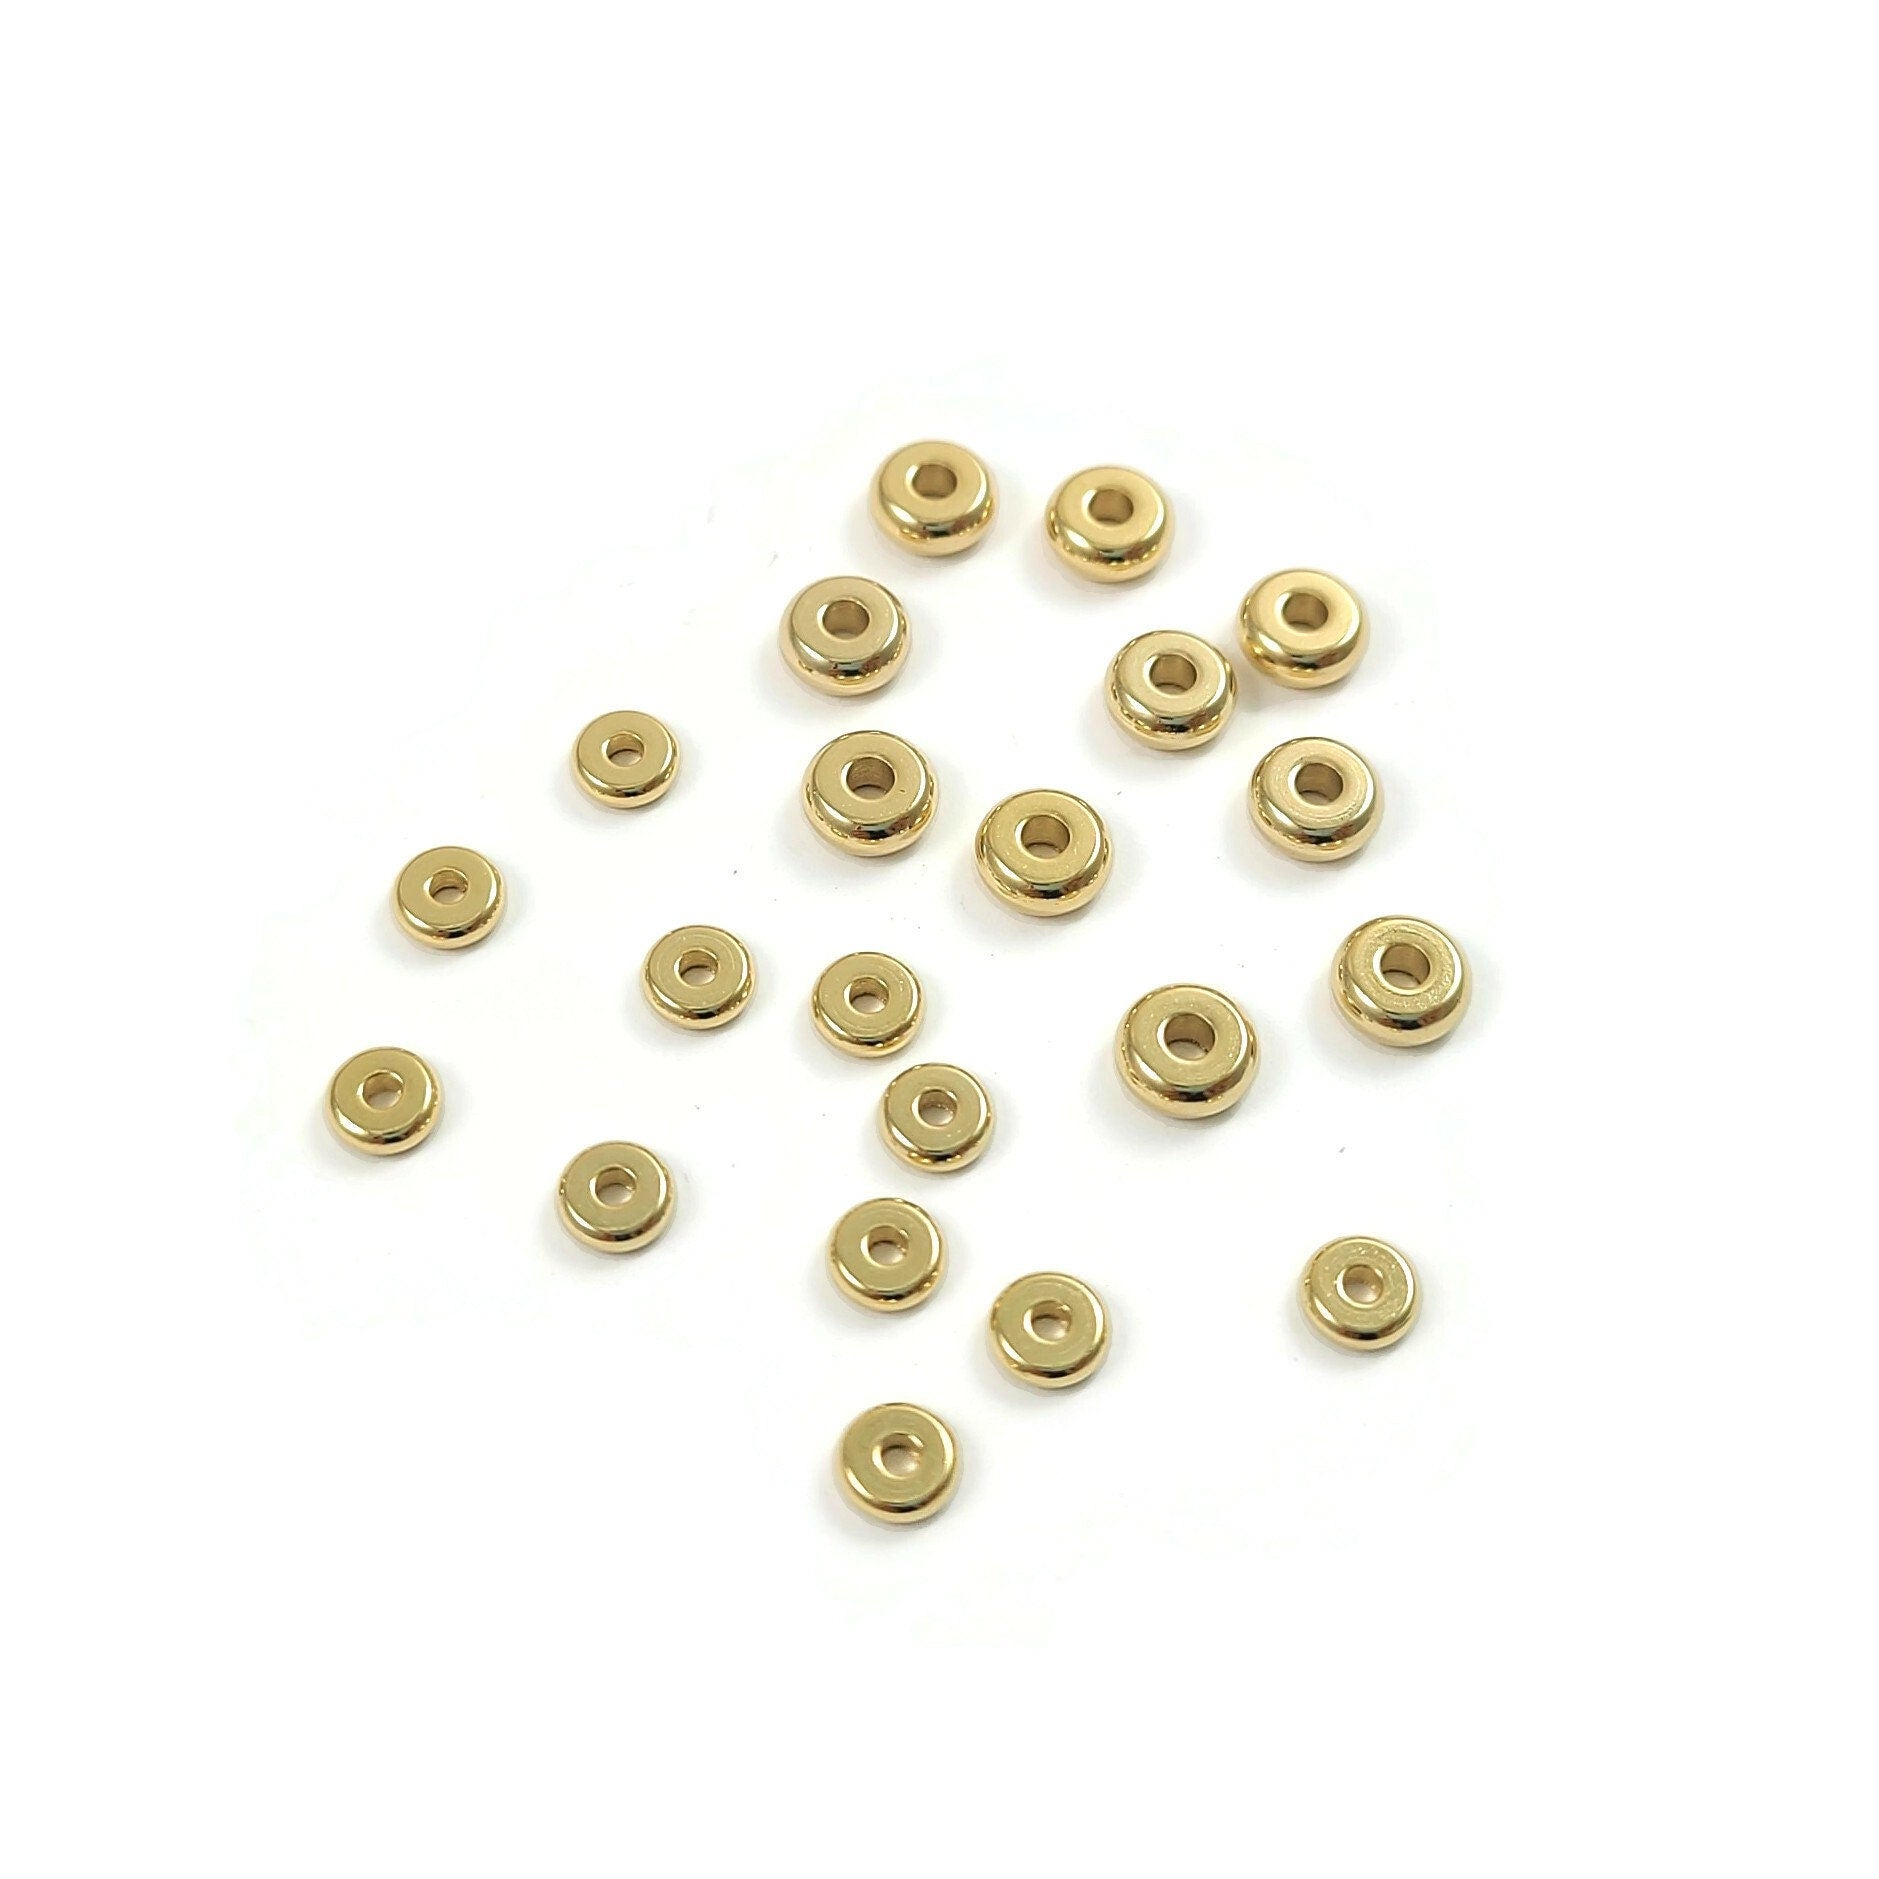 18K gold spacer beads, 4mm, 5mm, Rondelle flat round beads, Stainless steel jewelry making beads